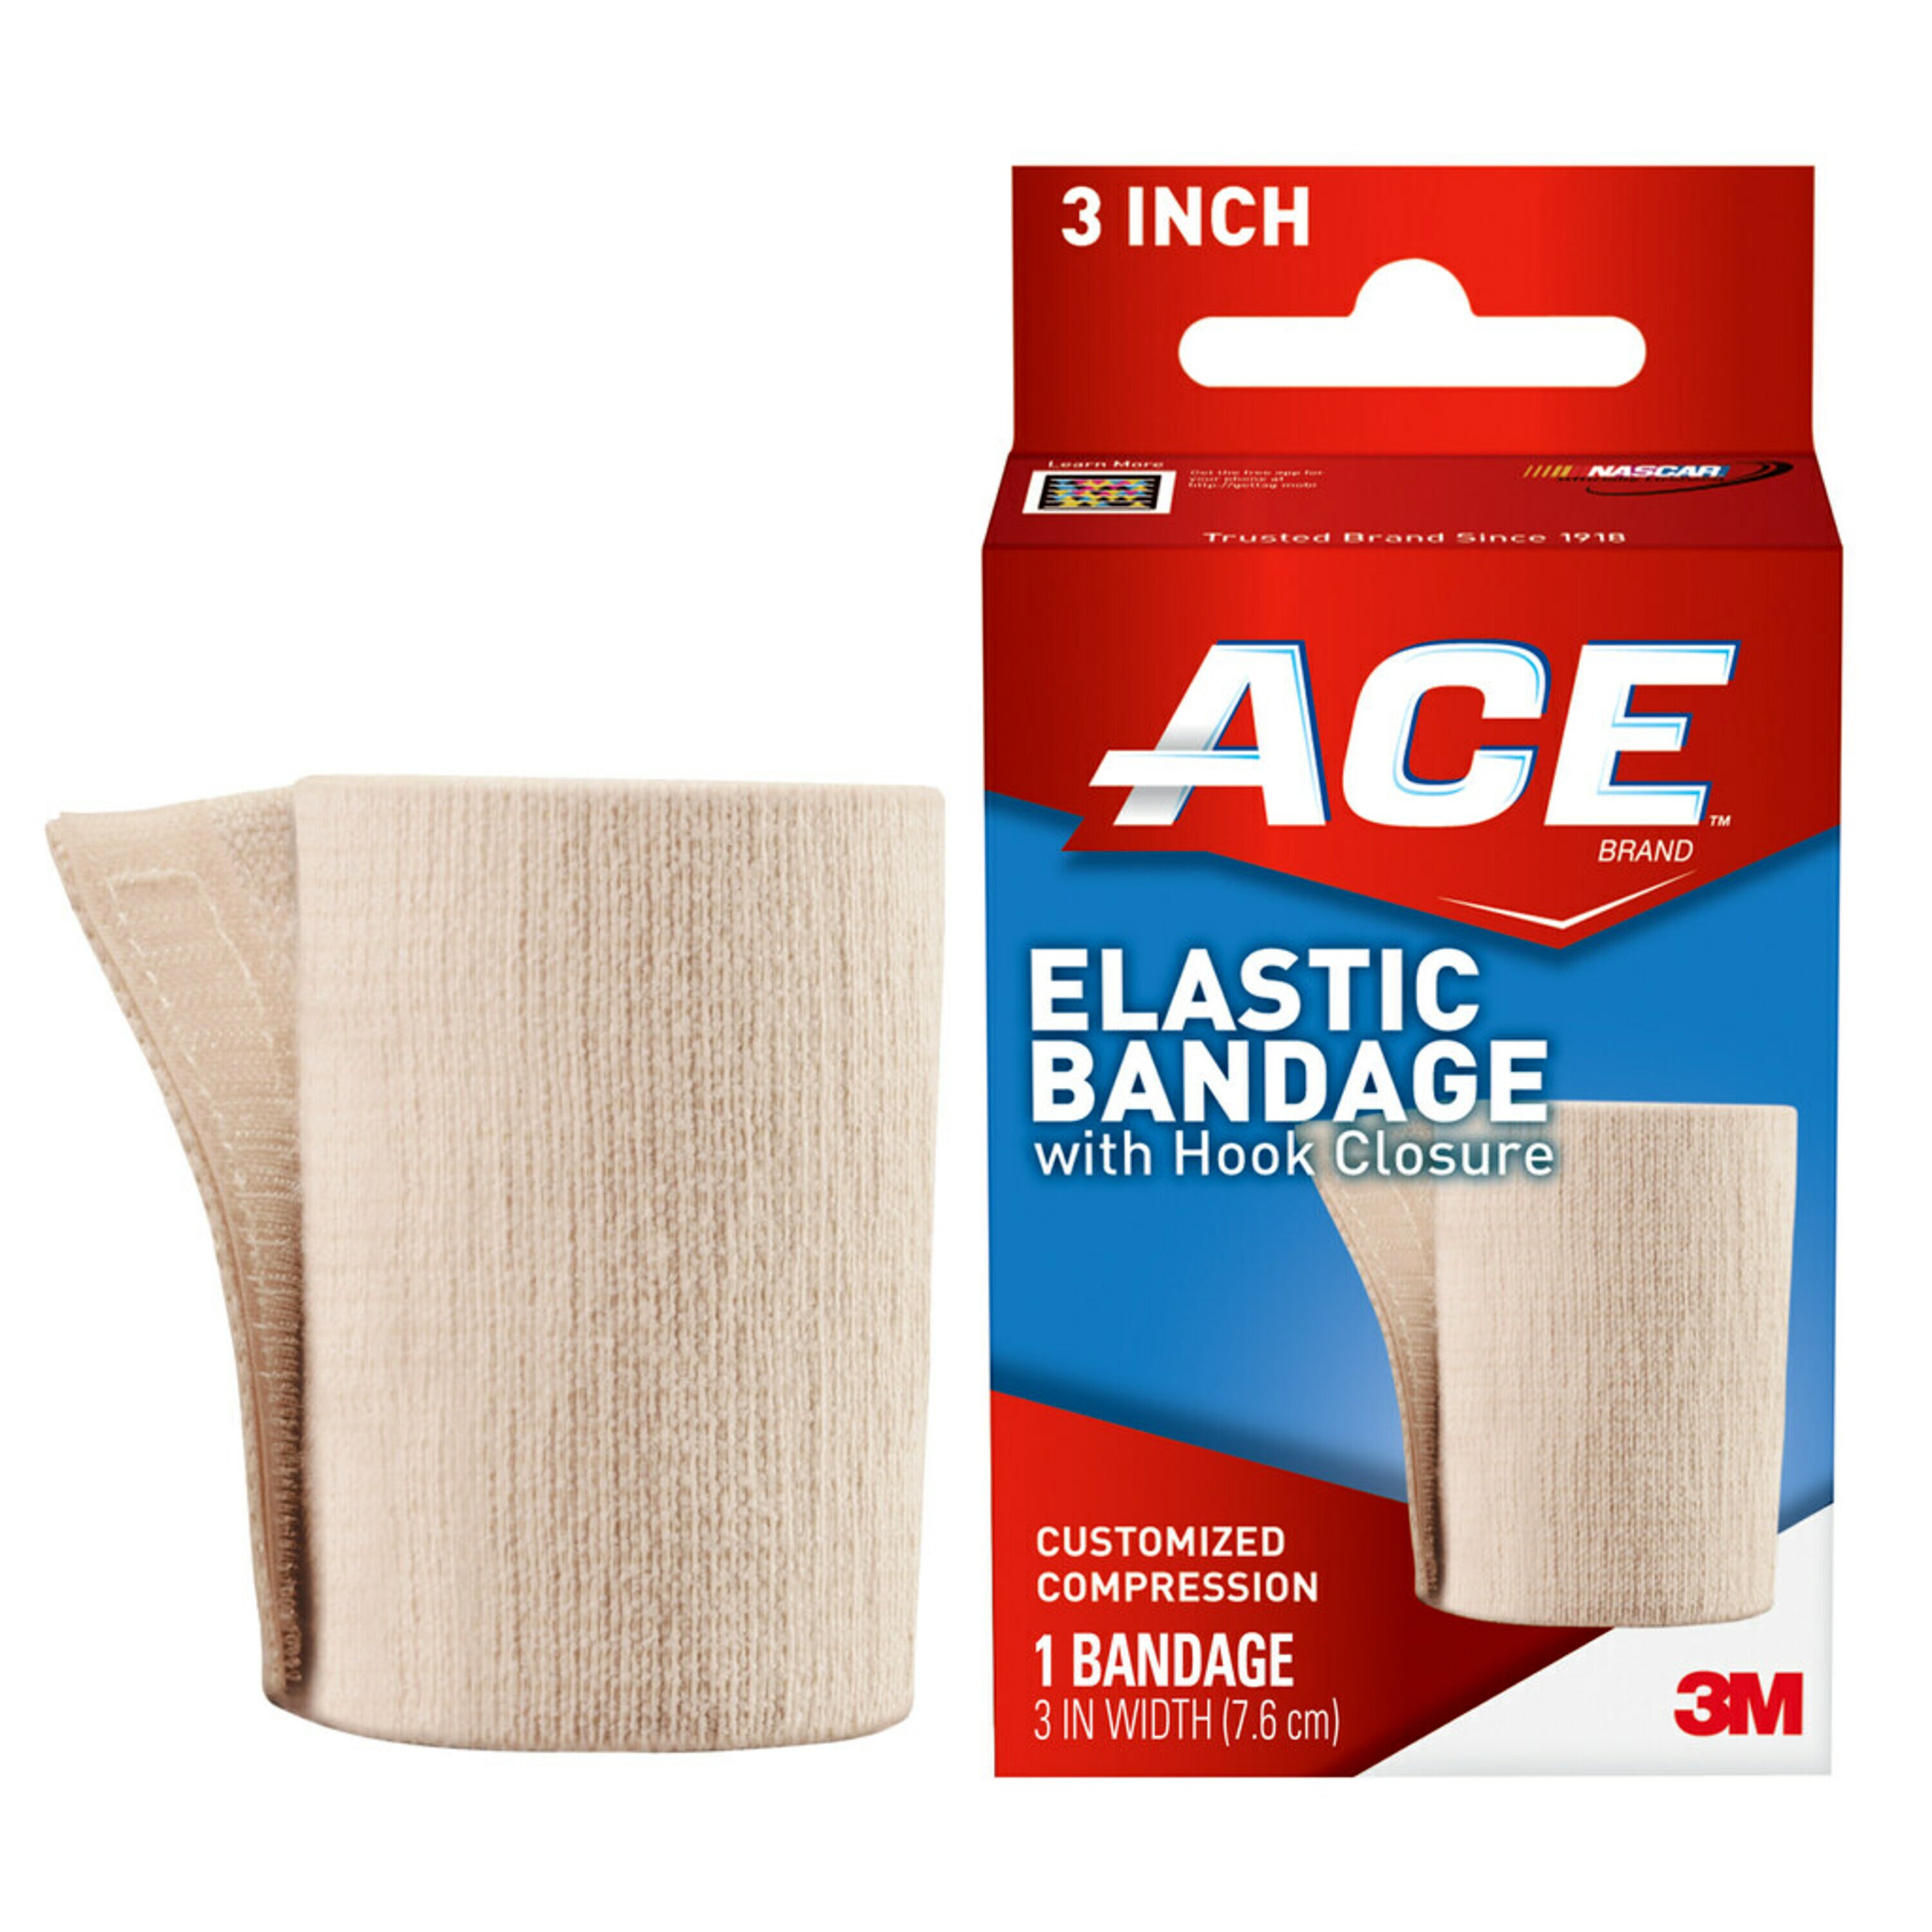 ACE™ Brand Elastic Bandage with Hook Closure – 3”, One Size Fits Most - image 1 of 13